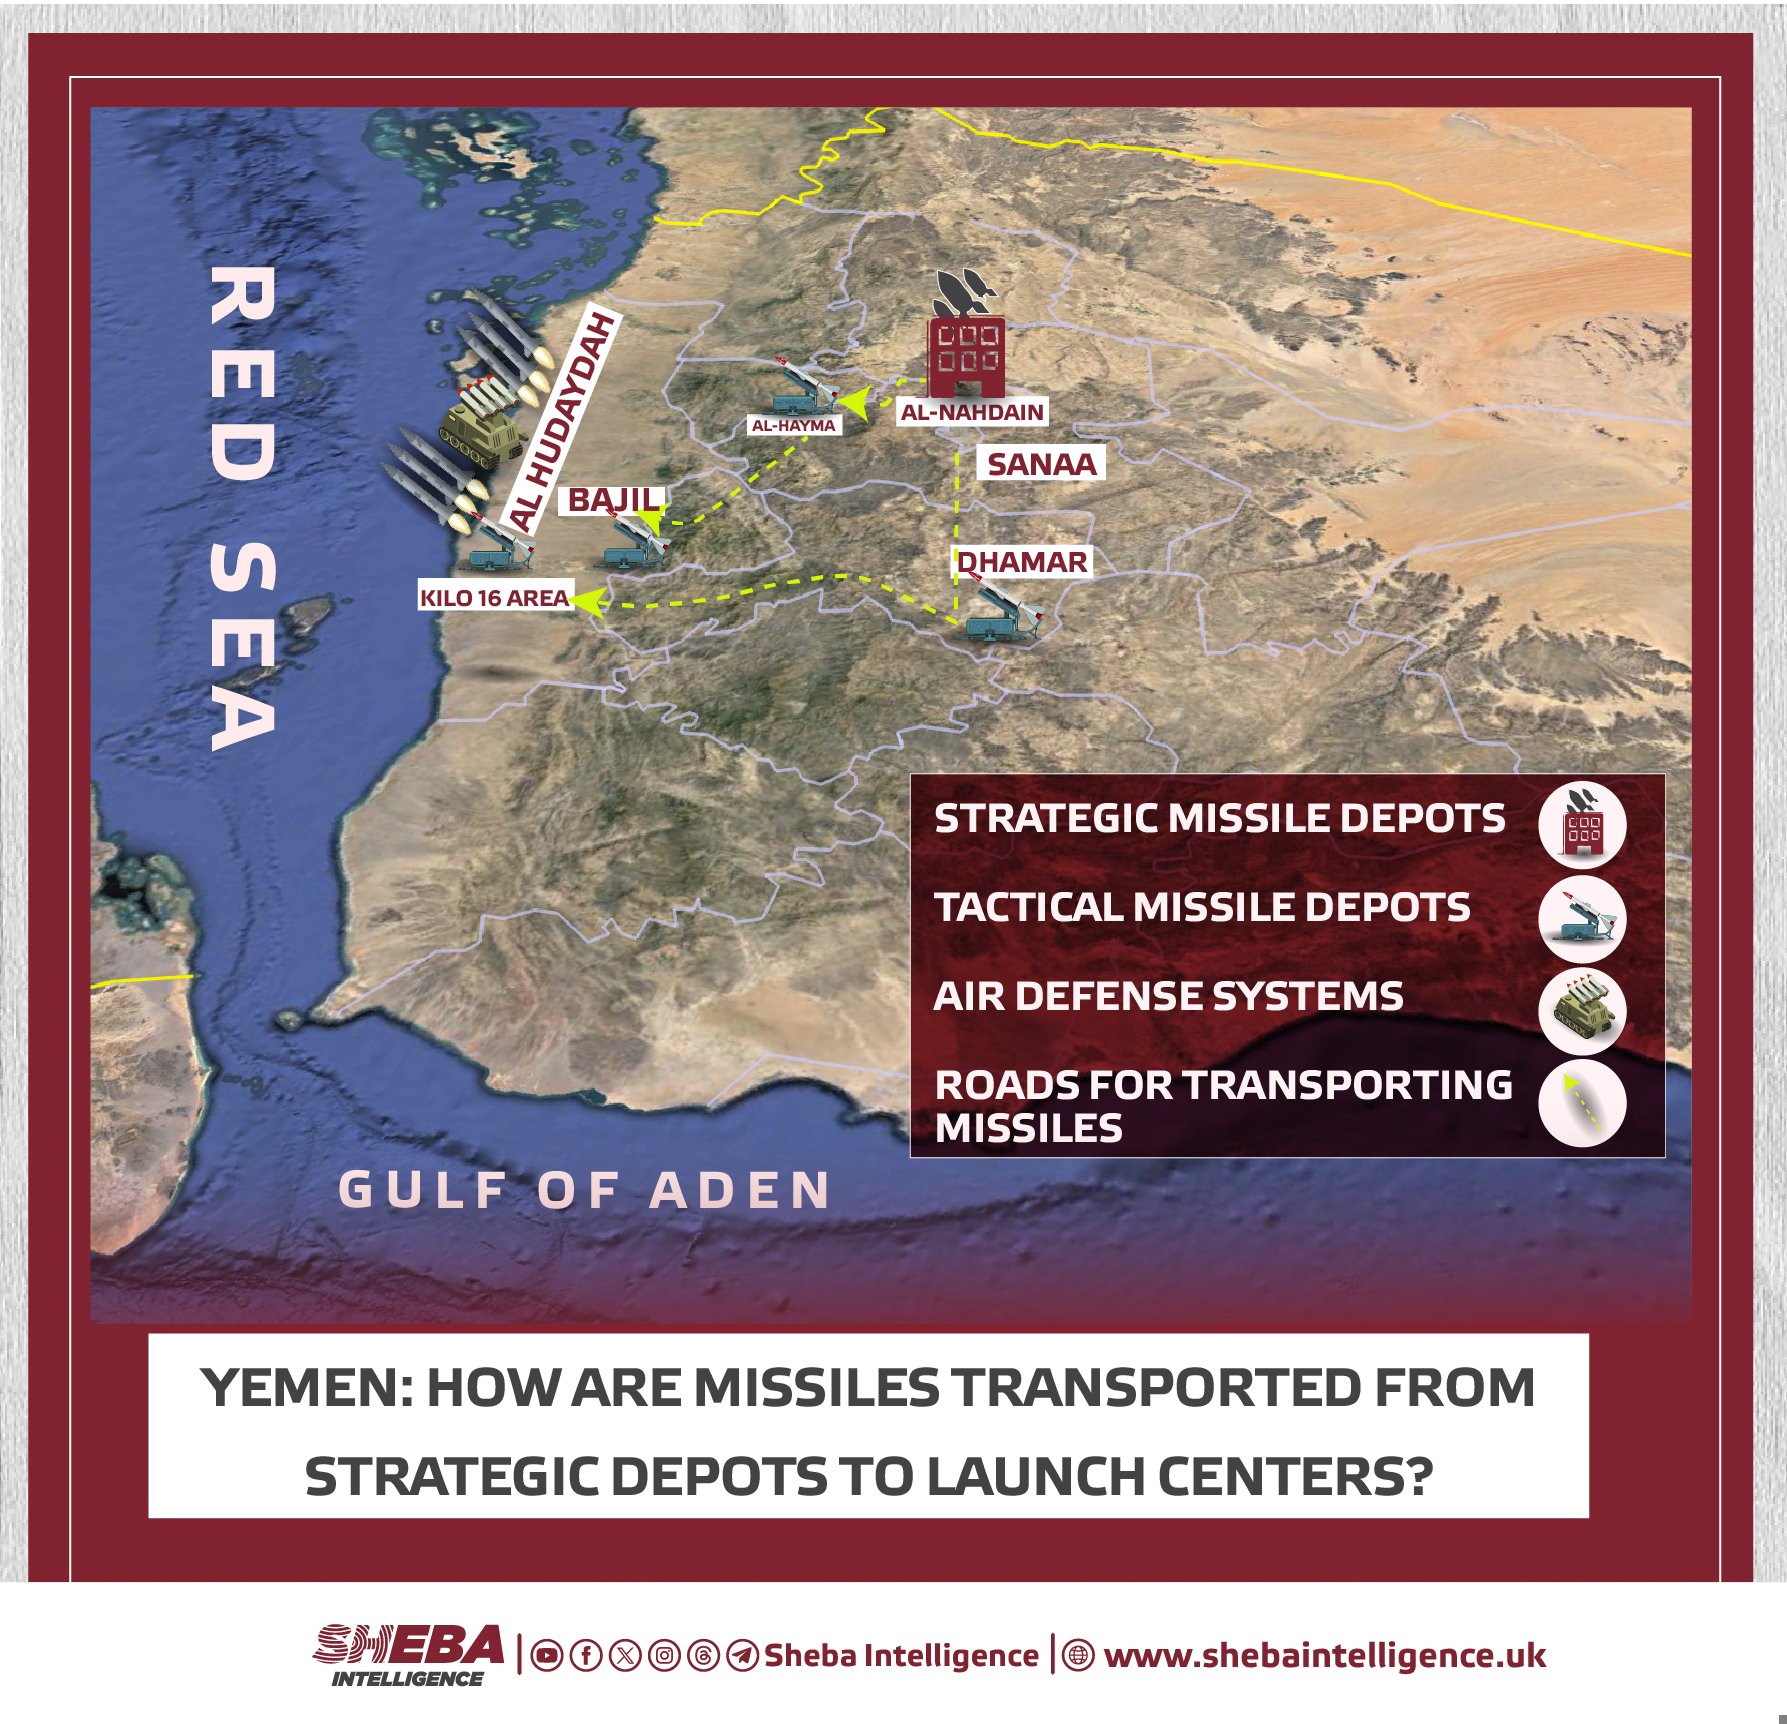 Yemen: How Are Missiles Transported From Strategic Depots to Launch Centers?